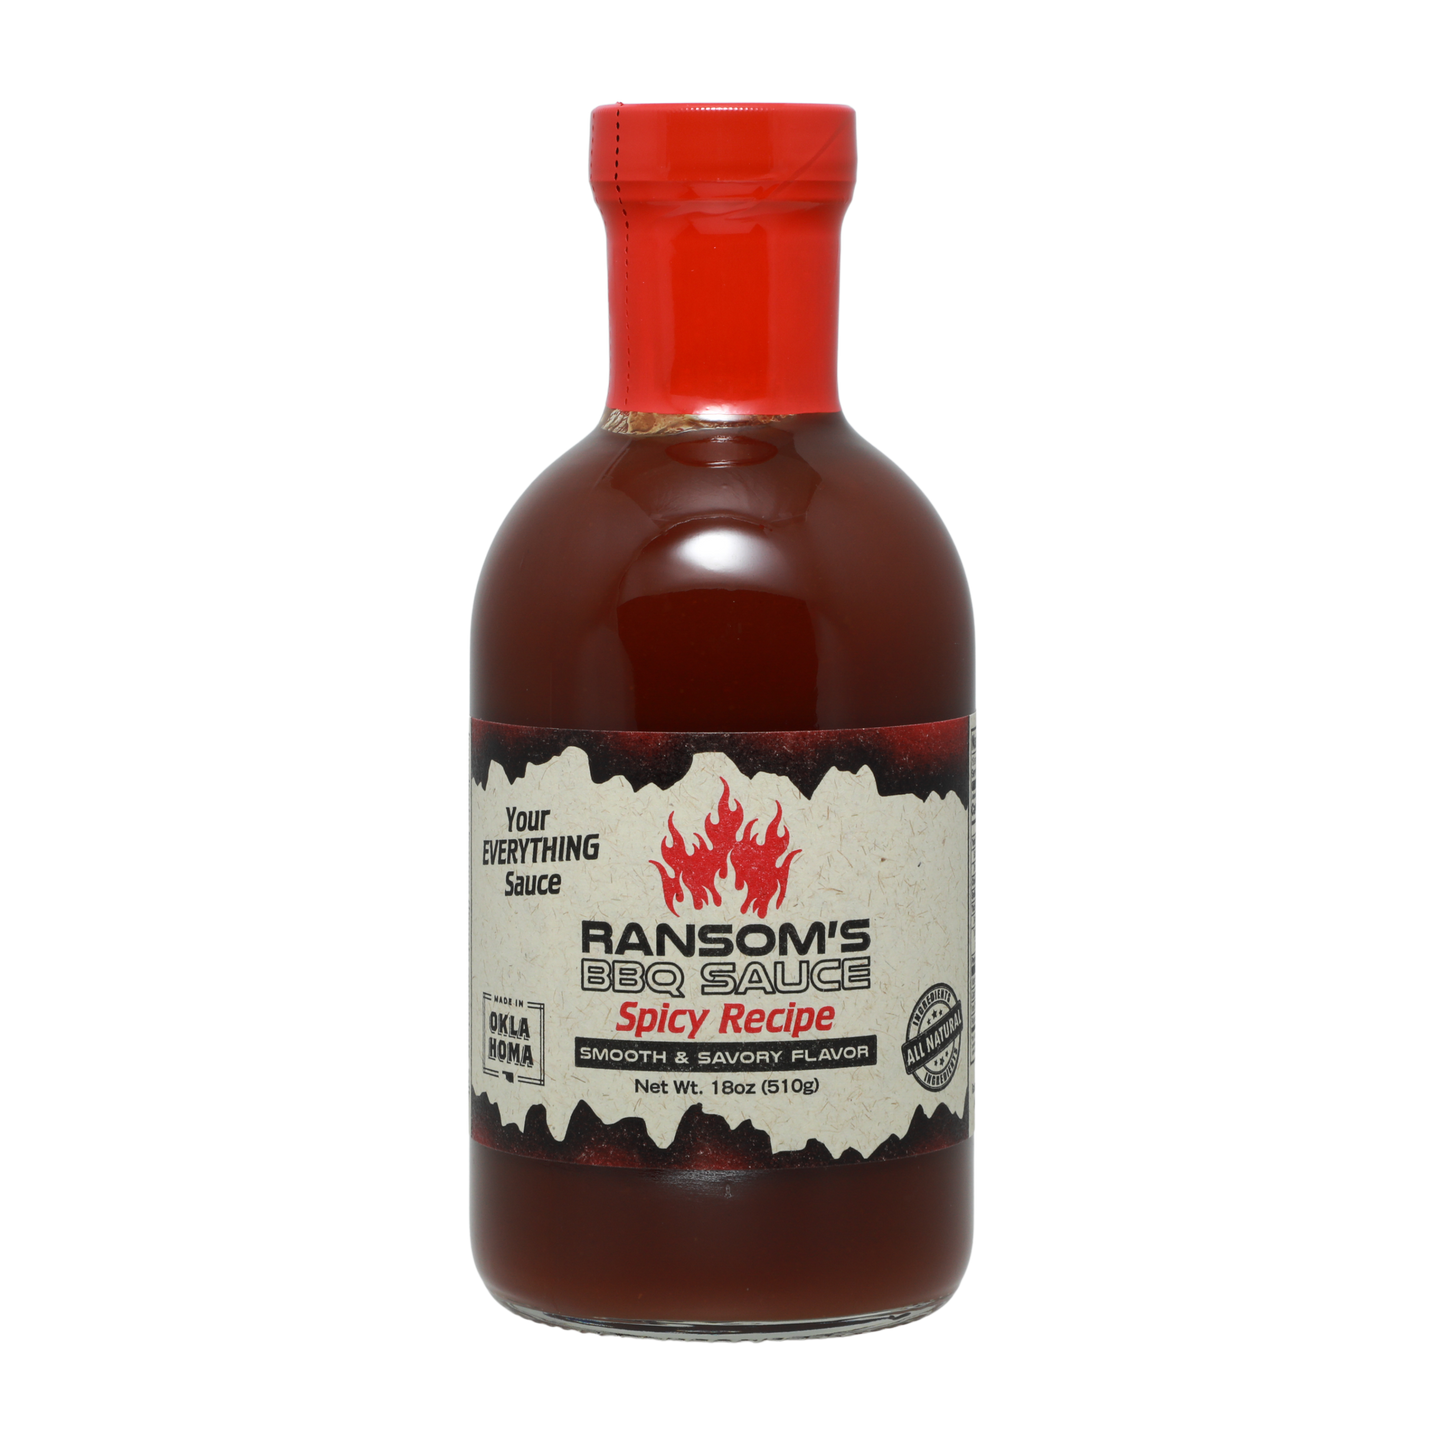 Ransom's Spicy BBQ Sauce